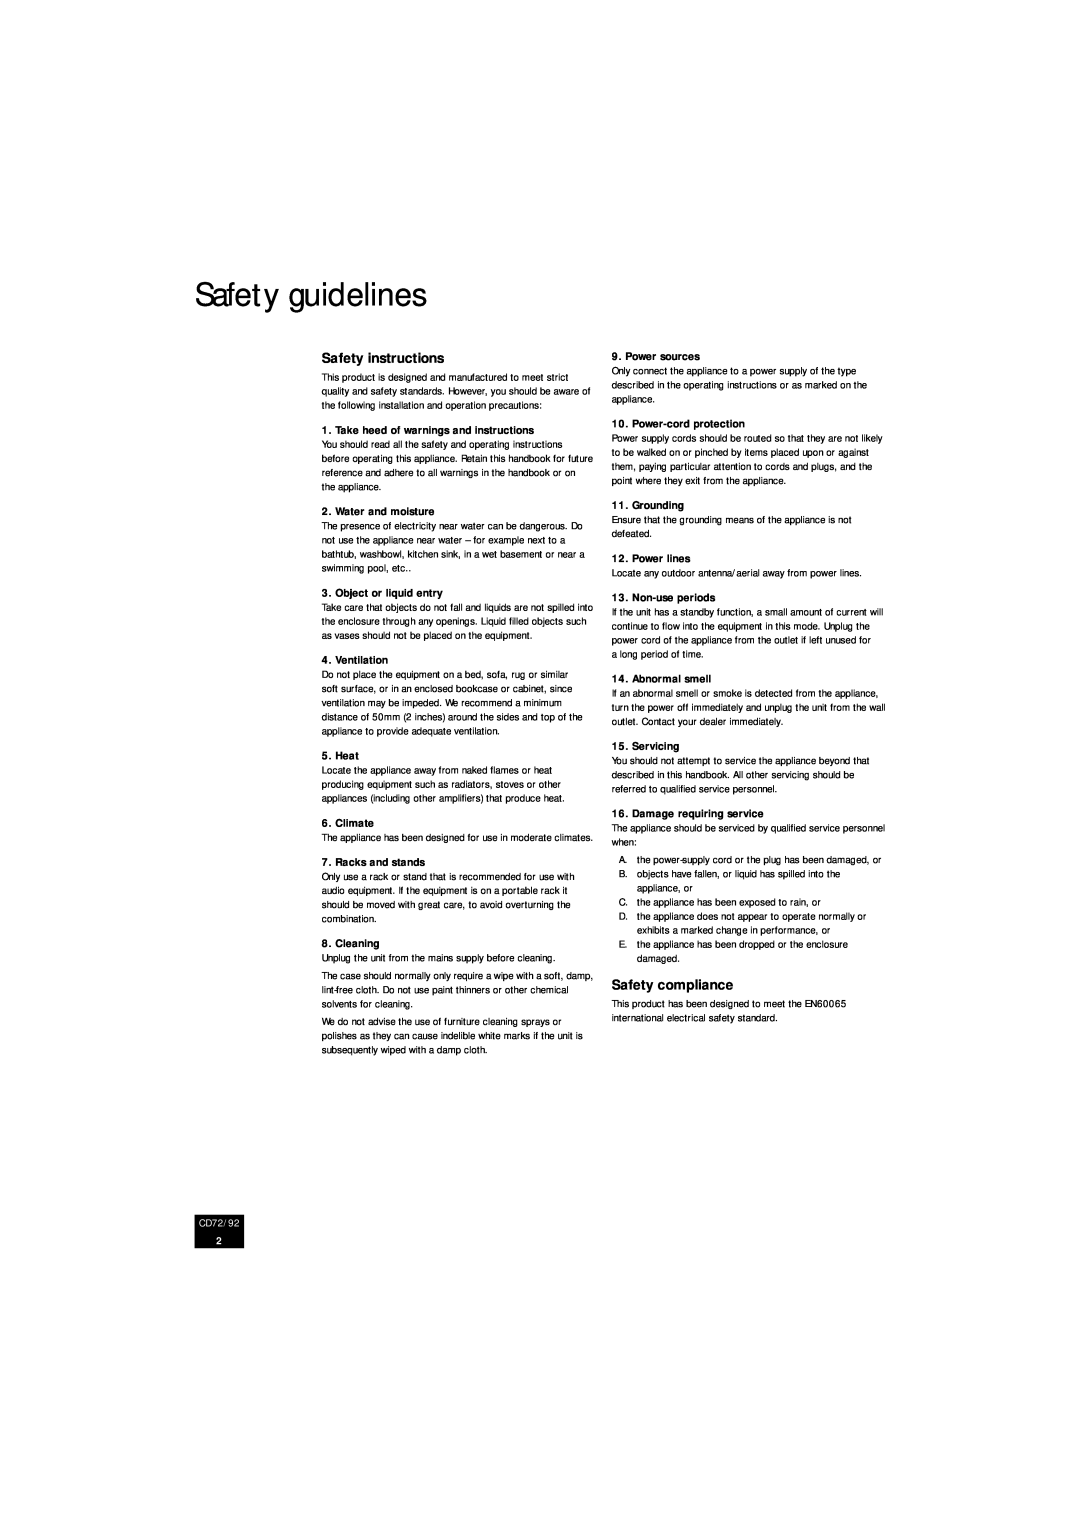 Arcam CD92 manual Safety guidelines, Safety instructions, Safety compliance, CD72/92 CD72/92 